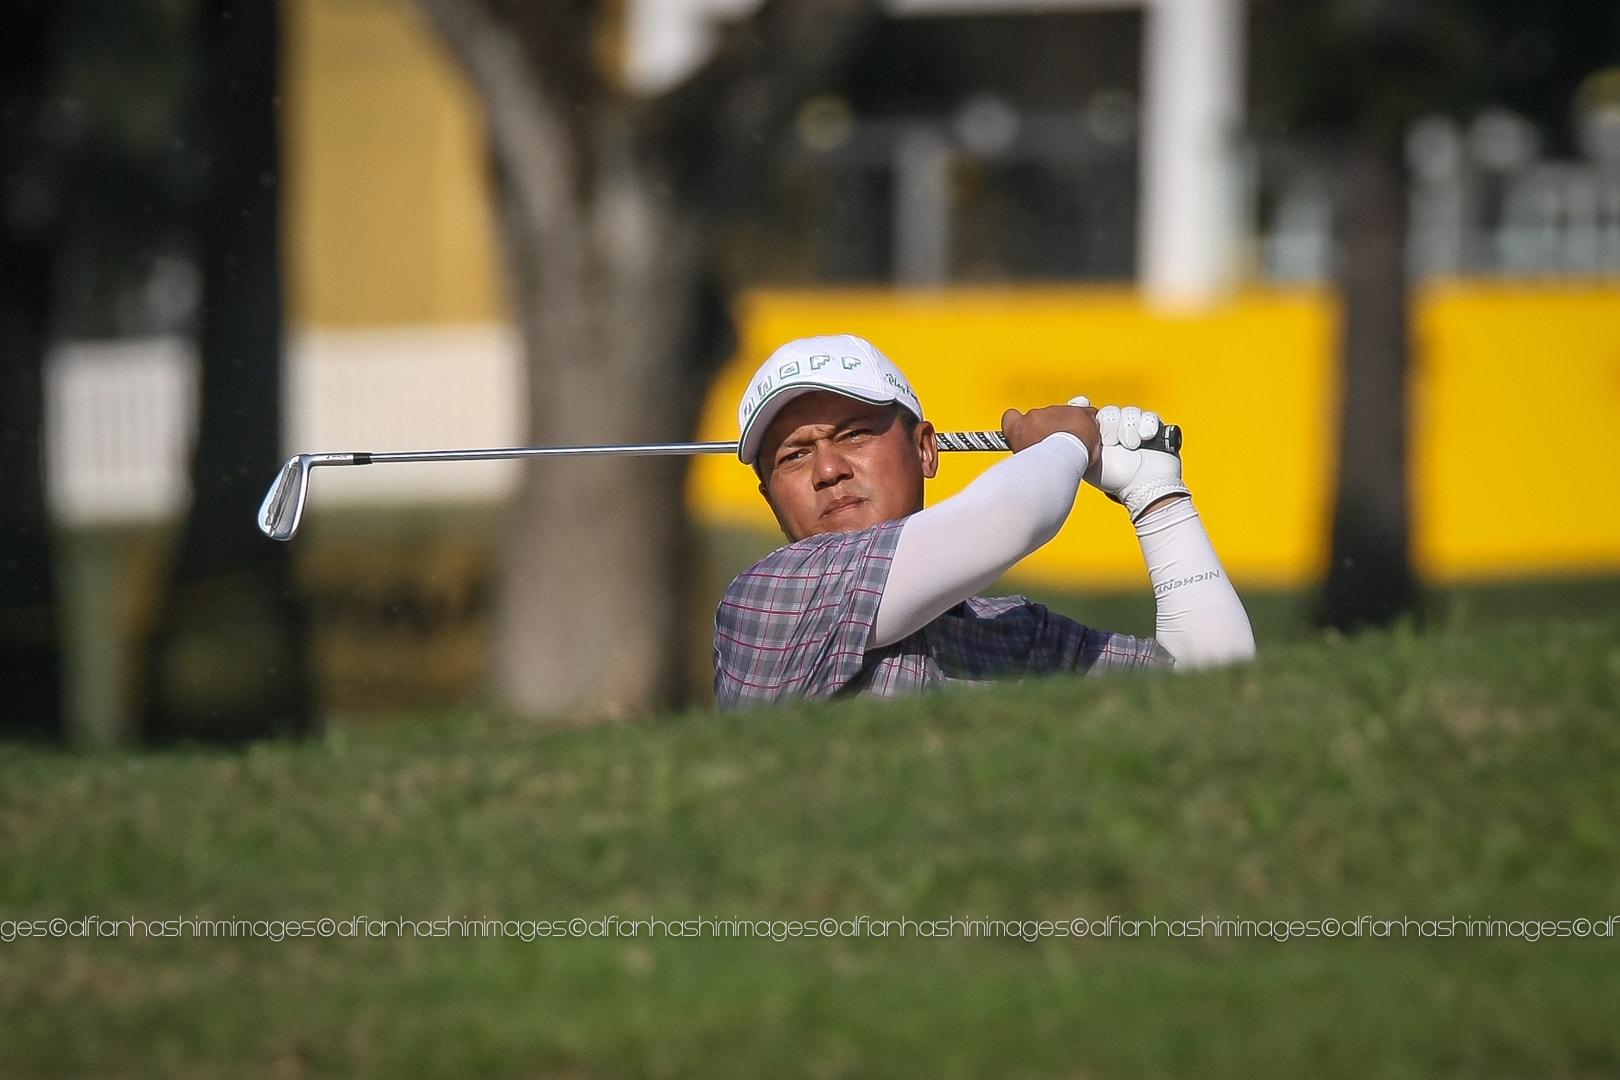 Canon EOS-1D Mark III sample photo. Maybank championship 2017 day 01 photos of the day photography